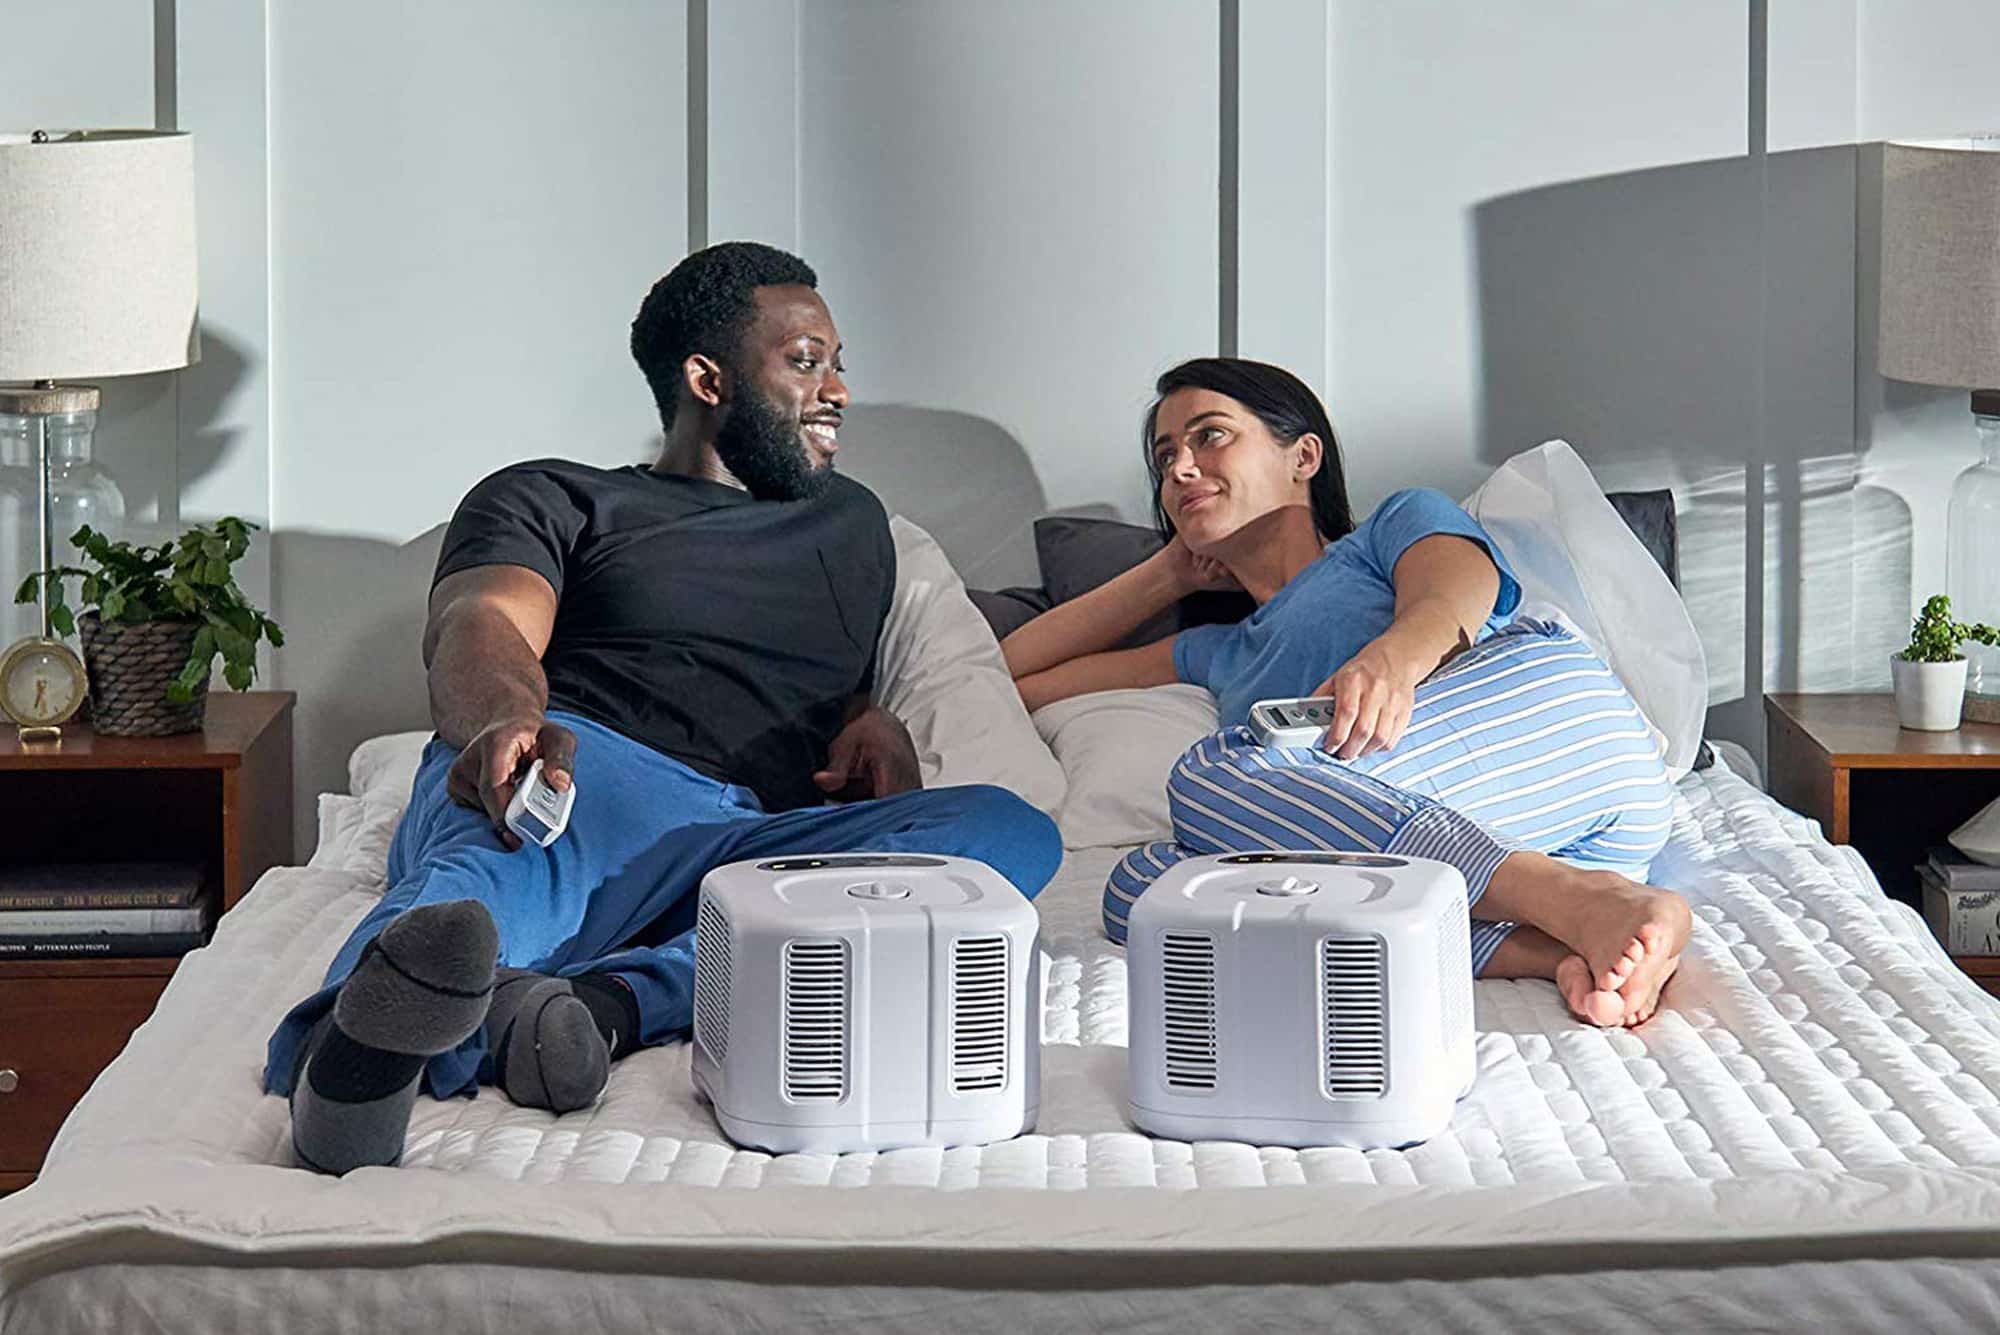 chilipad mattress topper king size reviews - Ooler Review: The Ooler Sleep System Is Like an Air Conditioner for Your  Bed   GQ